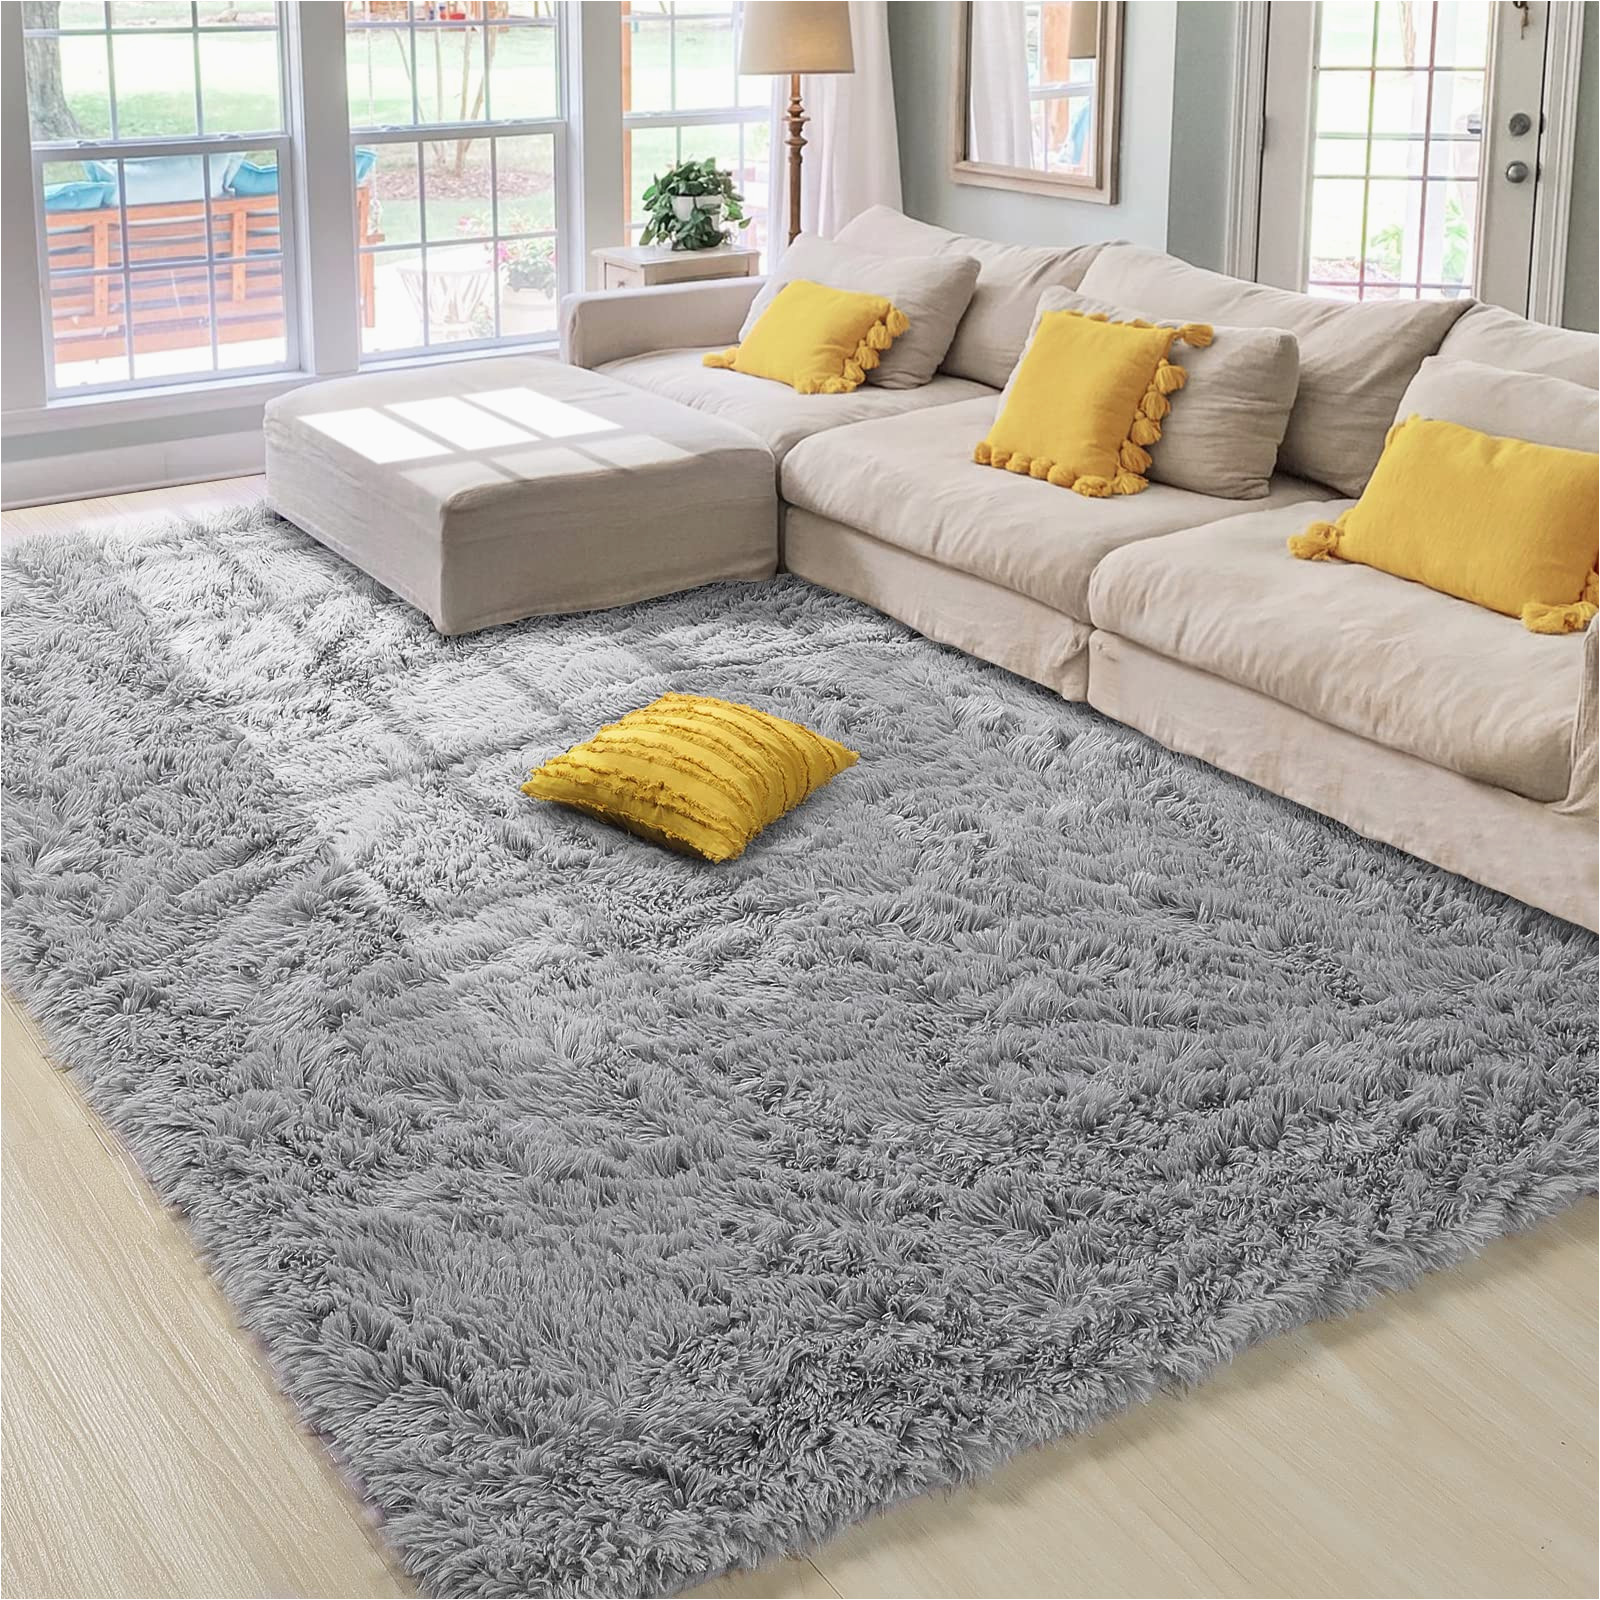 Extra Large soft area Rugs Amangel Super soft Shaggy area Rug Fluffy Carpet, 6′ X 9′, Indoor Modern Fuzzy Rugs for Living Room Bedroom, Large Furry Rug for Kids Boys Girls Room …